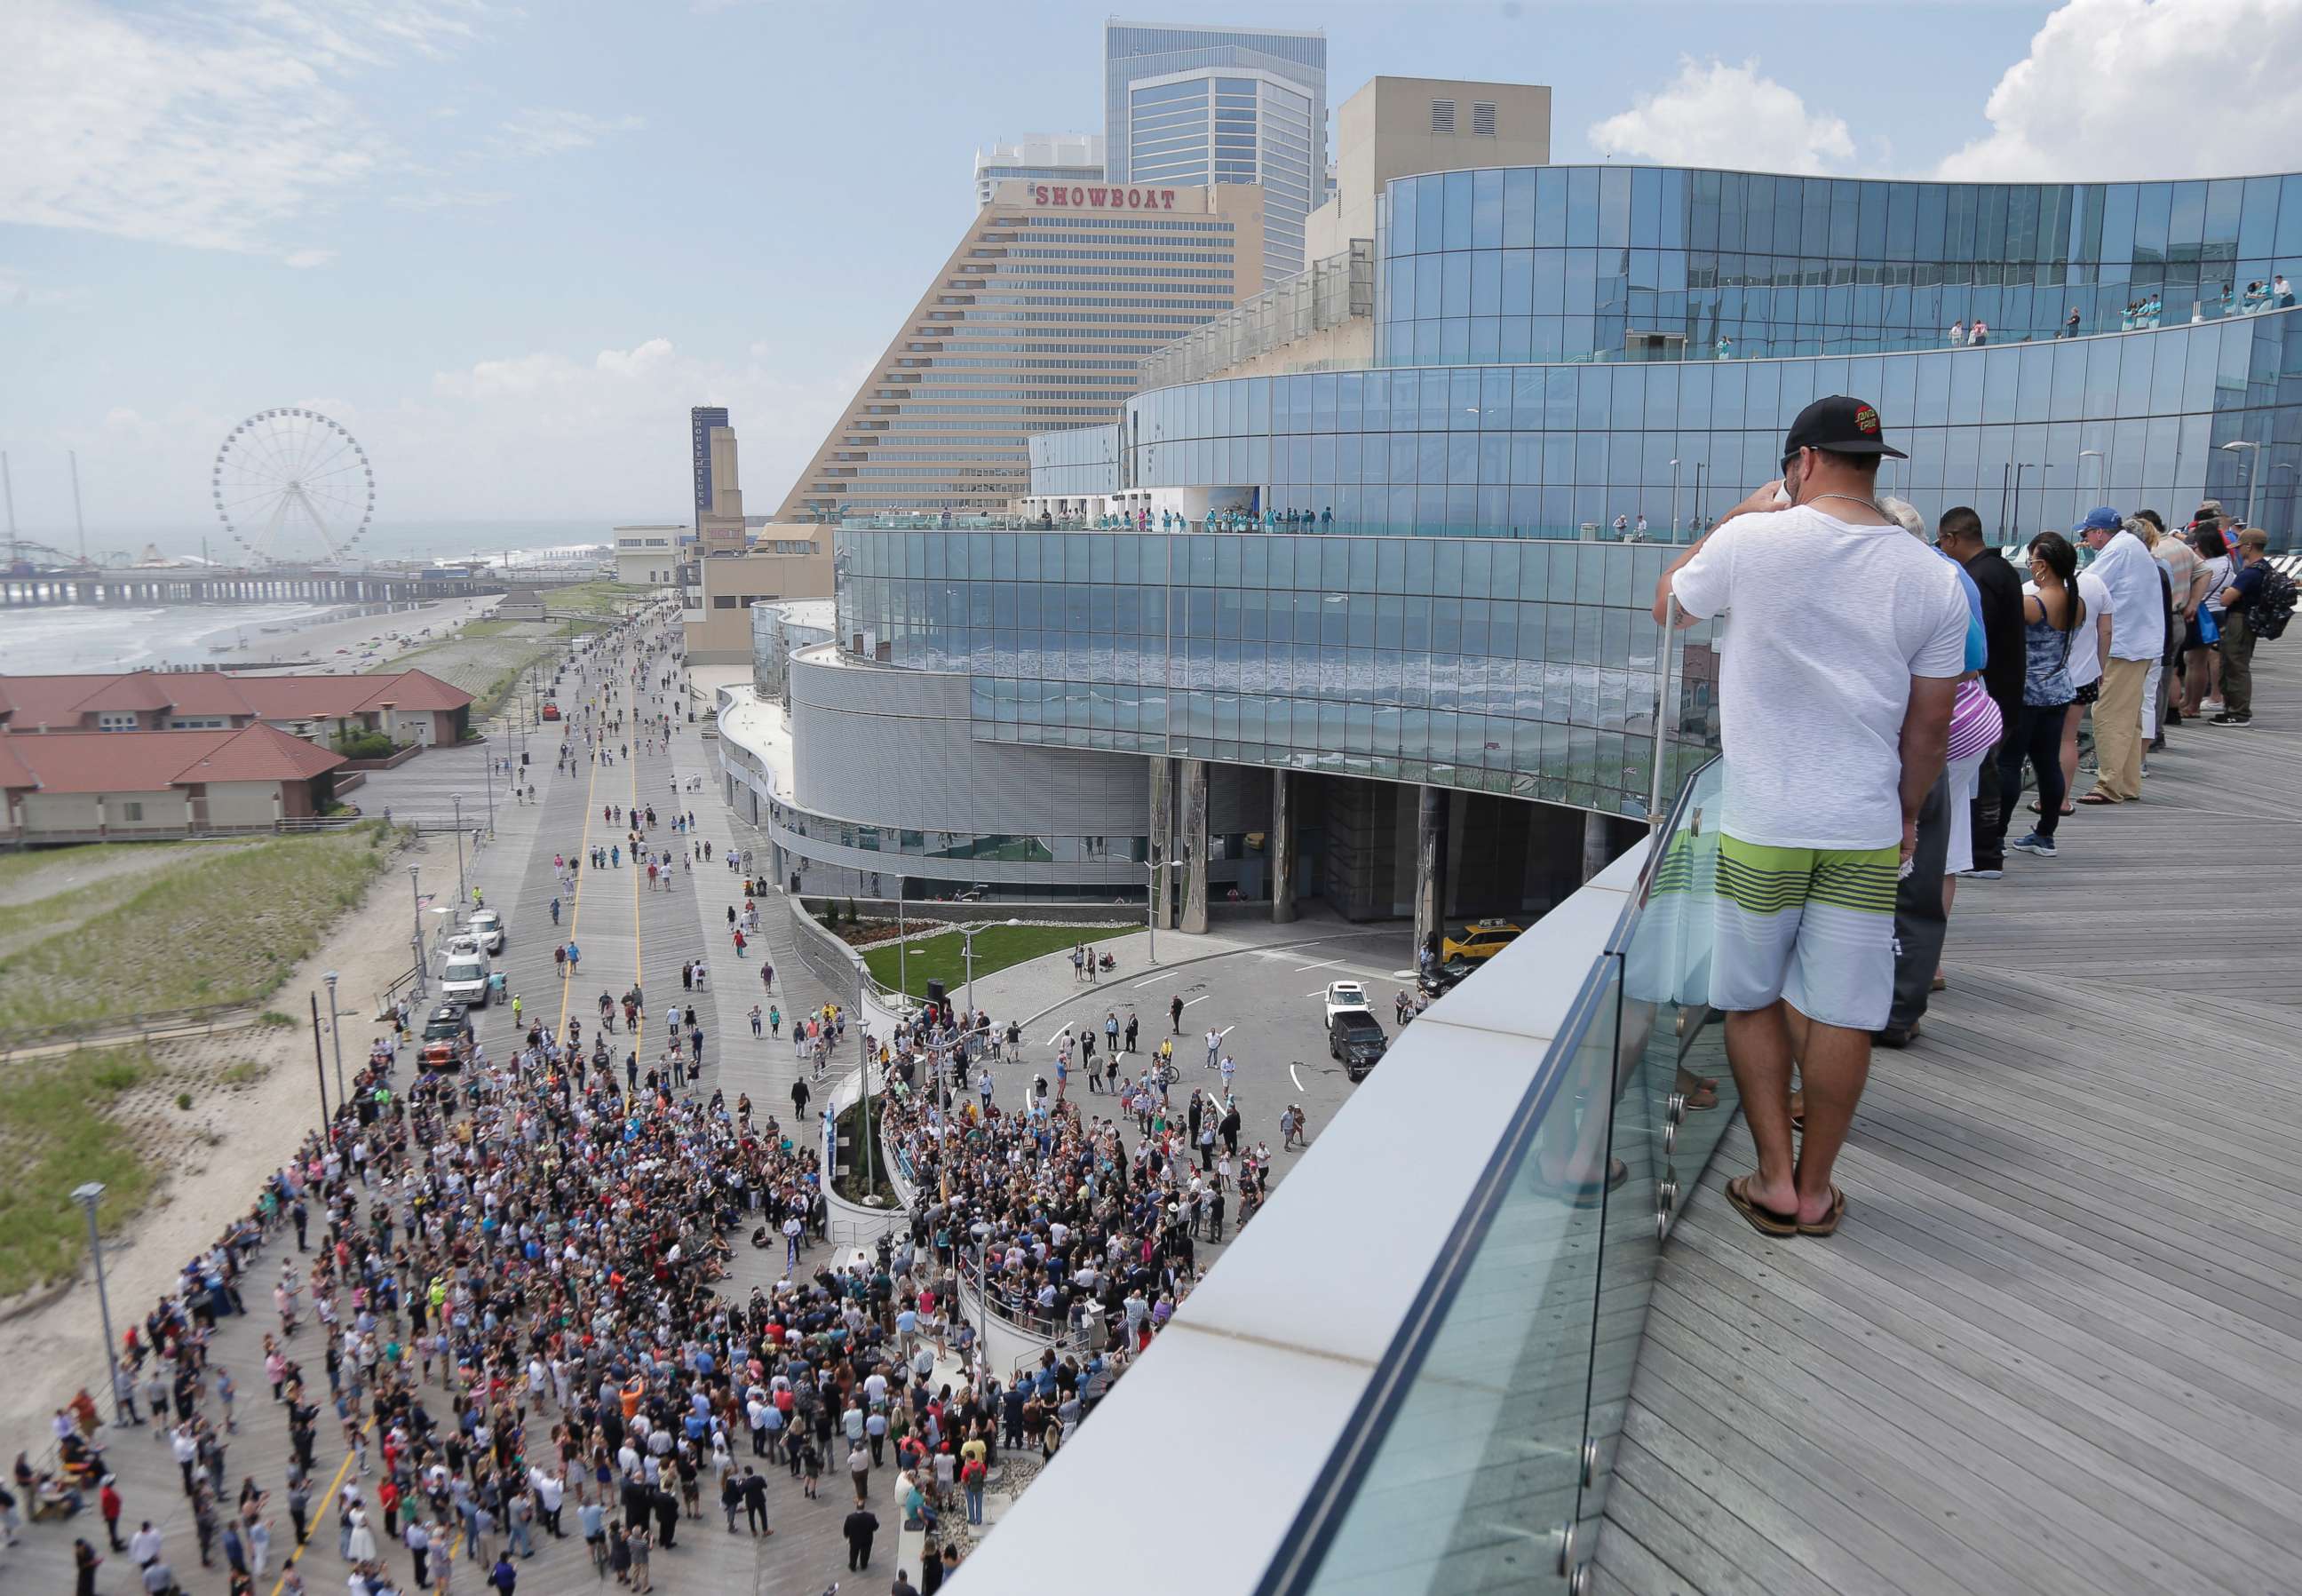 PHOTO: People gather on the boardwalk and the balconies to watch a ribbon cutting ceremony for the Ocean Resort Casino in Atlantic City, N.J., June 28, 2018.